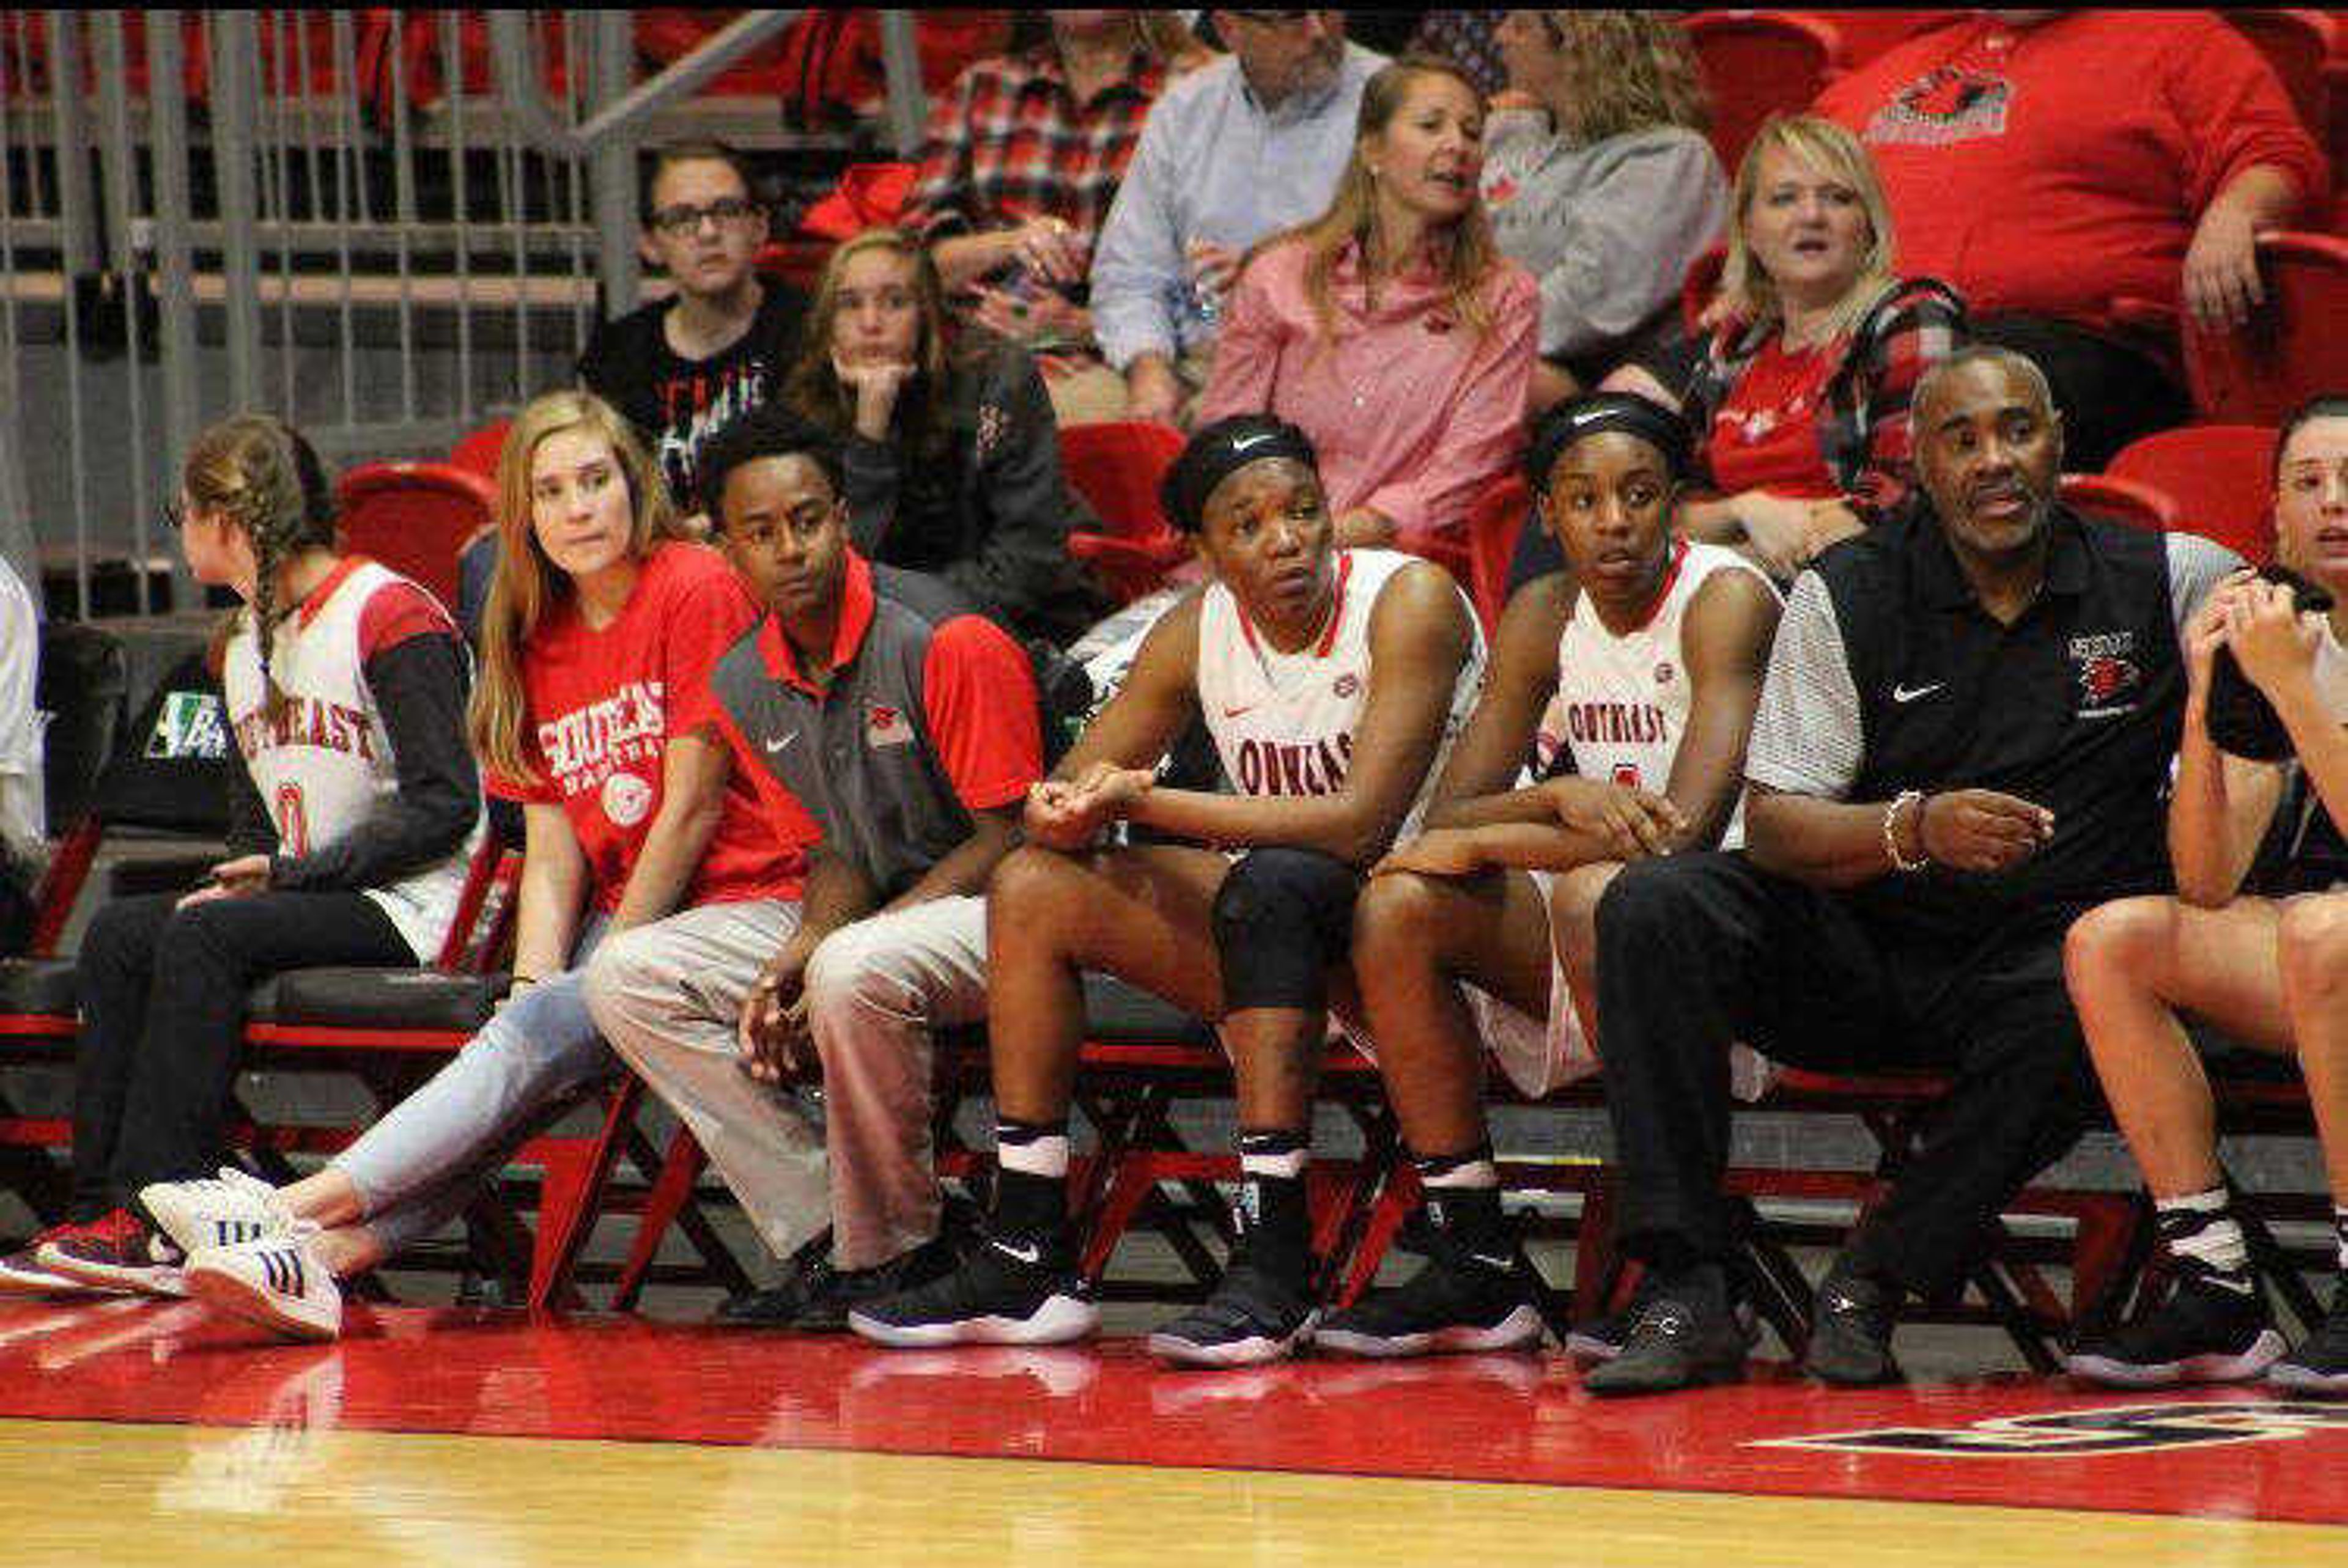 Student managers Bryan Doze and Dexter sit at the end of the bench during a women’s basketball game.
